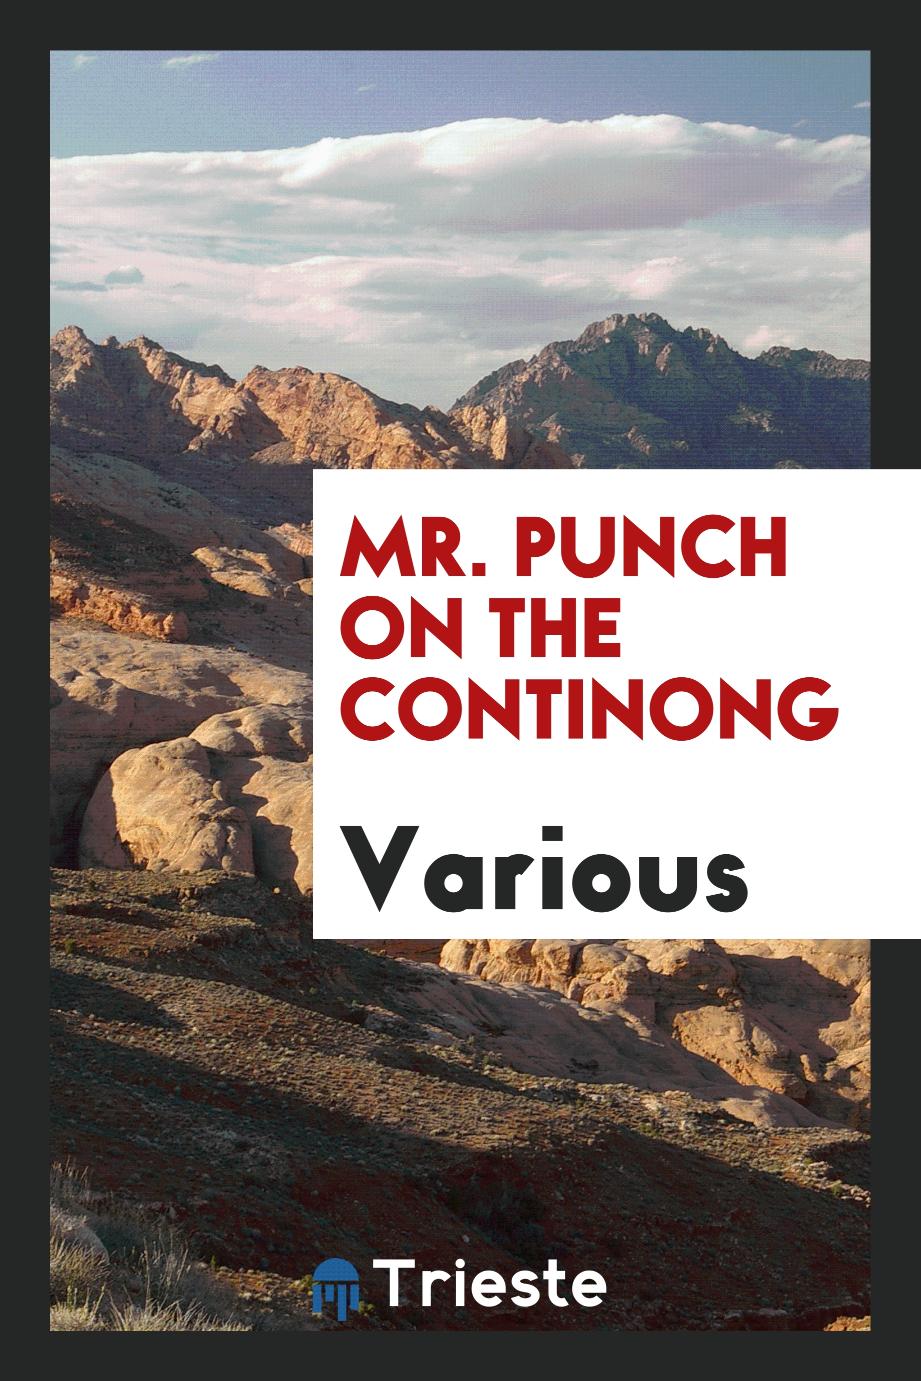 Mr. Punch on the continong